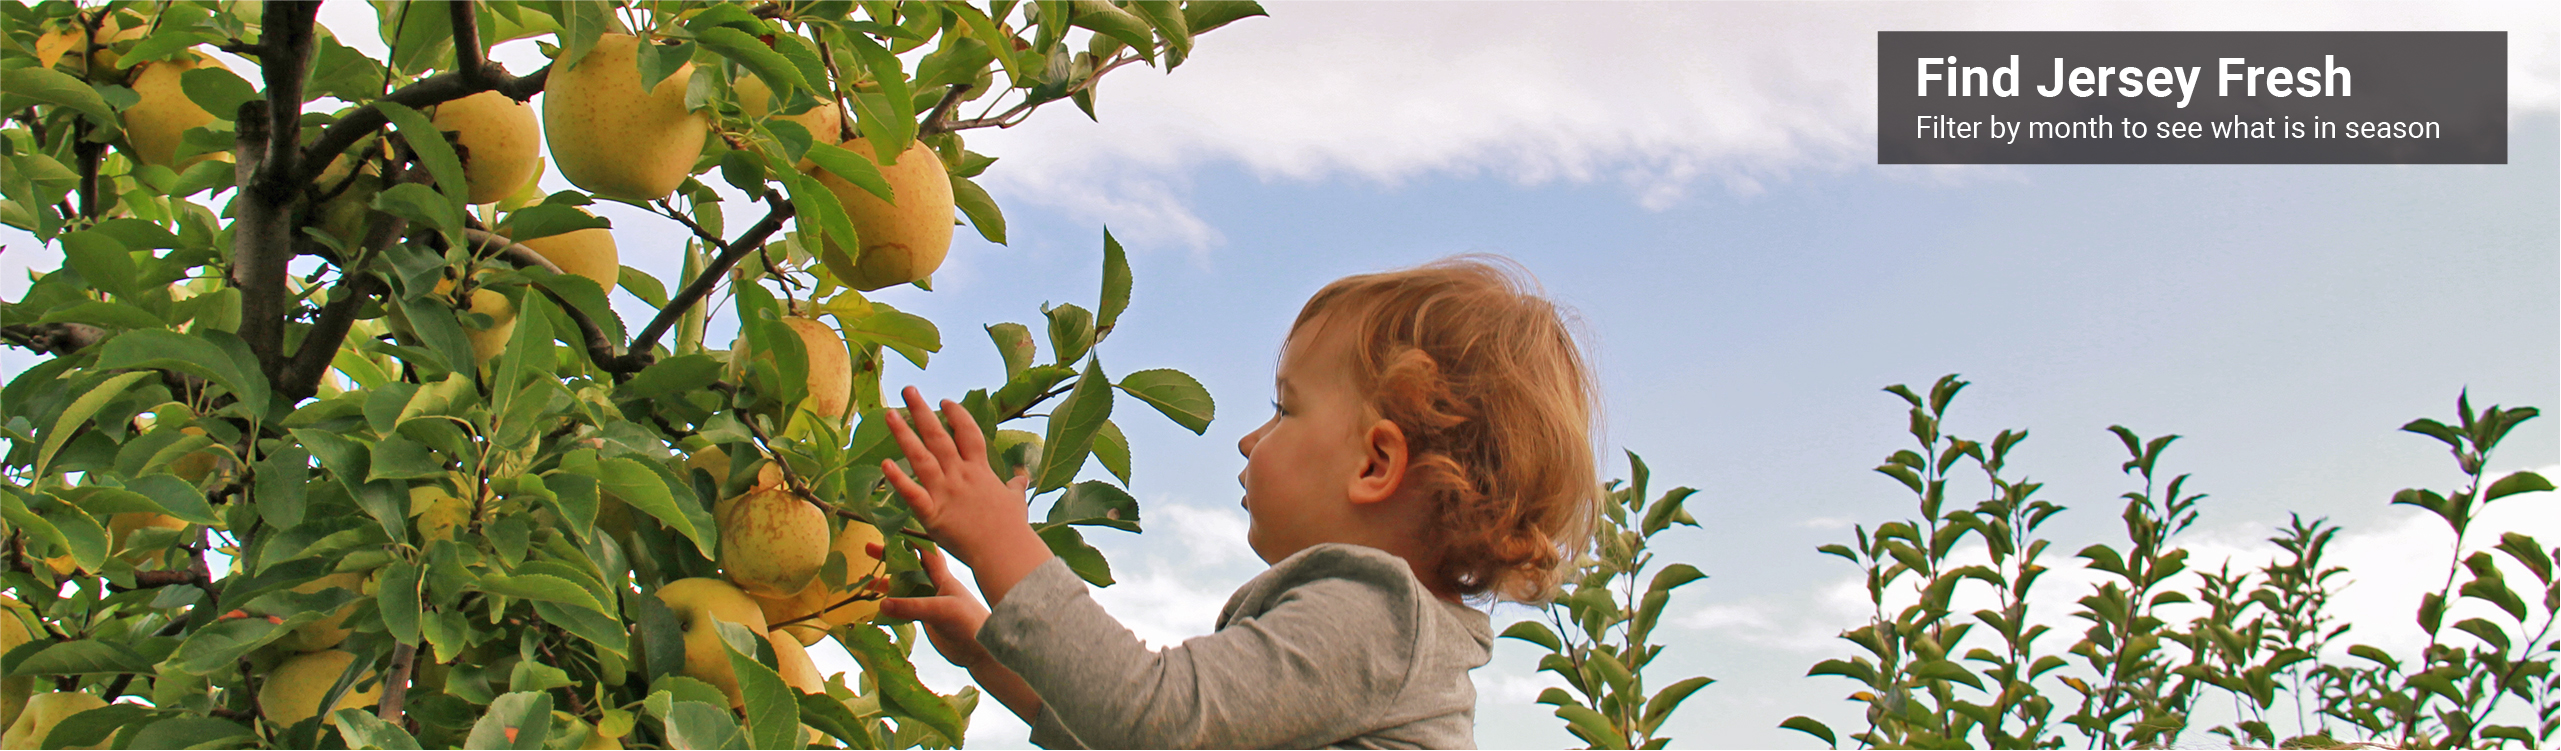 Child picking apple from tree. Text: Find Jersey Fresh. Filter by month to see what is in season.